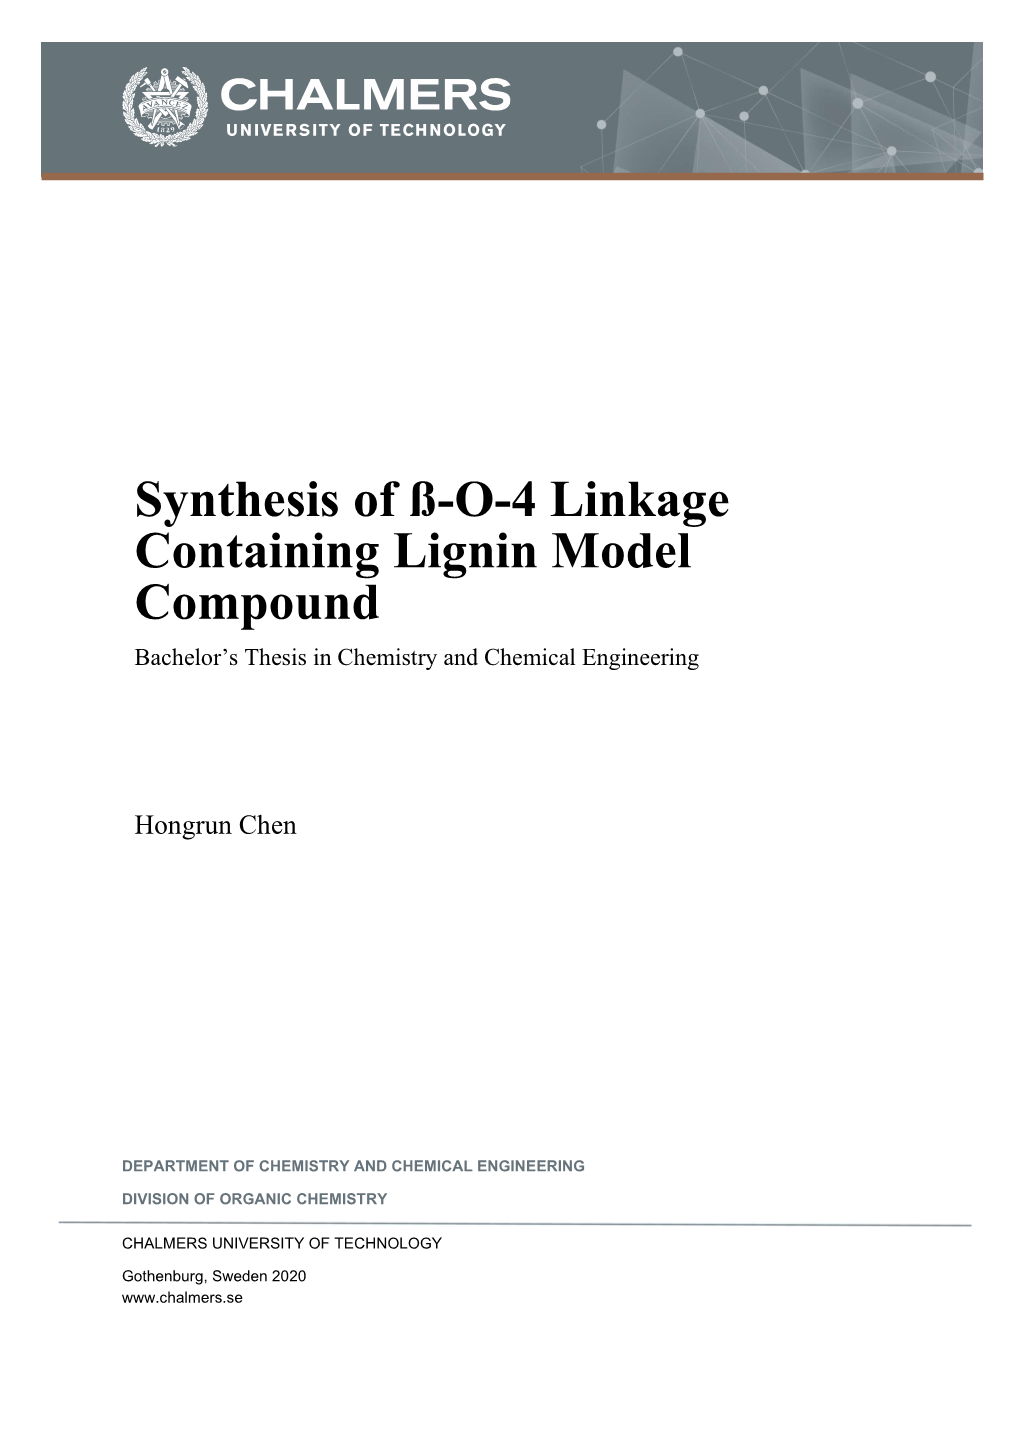 Synthesis of ß-O-4 Linkage Containing Lignin Model Compound